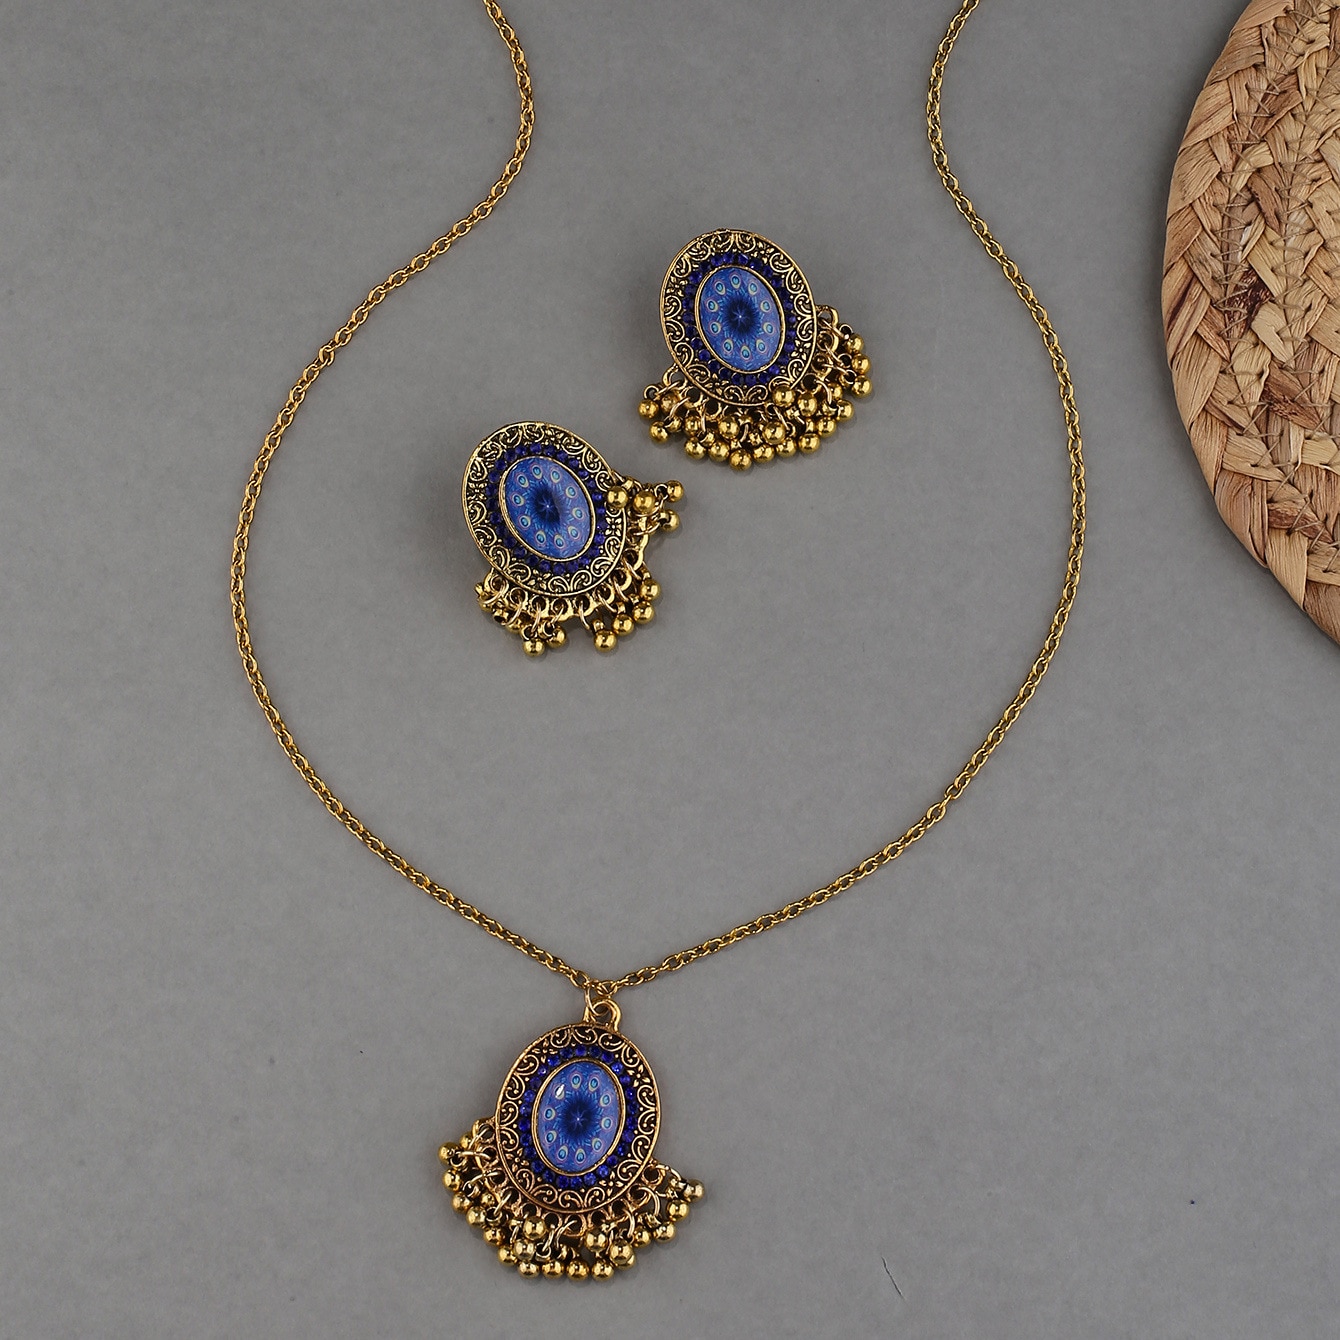 Afghan-Vintage-Tribal-Blue-Flower-Statement-Necklace-Earring-Jewelry-Sets-Gold-Color-Indian-Chain-Ne-1005004536385713-5